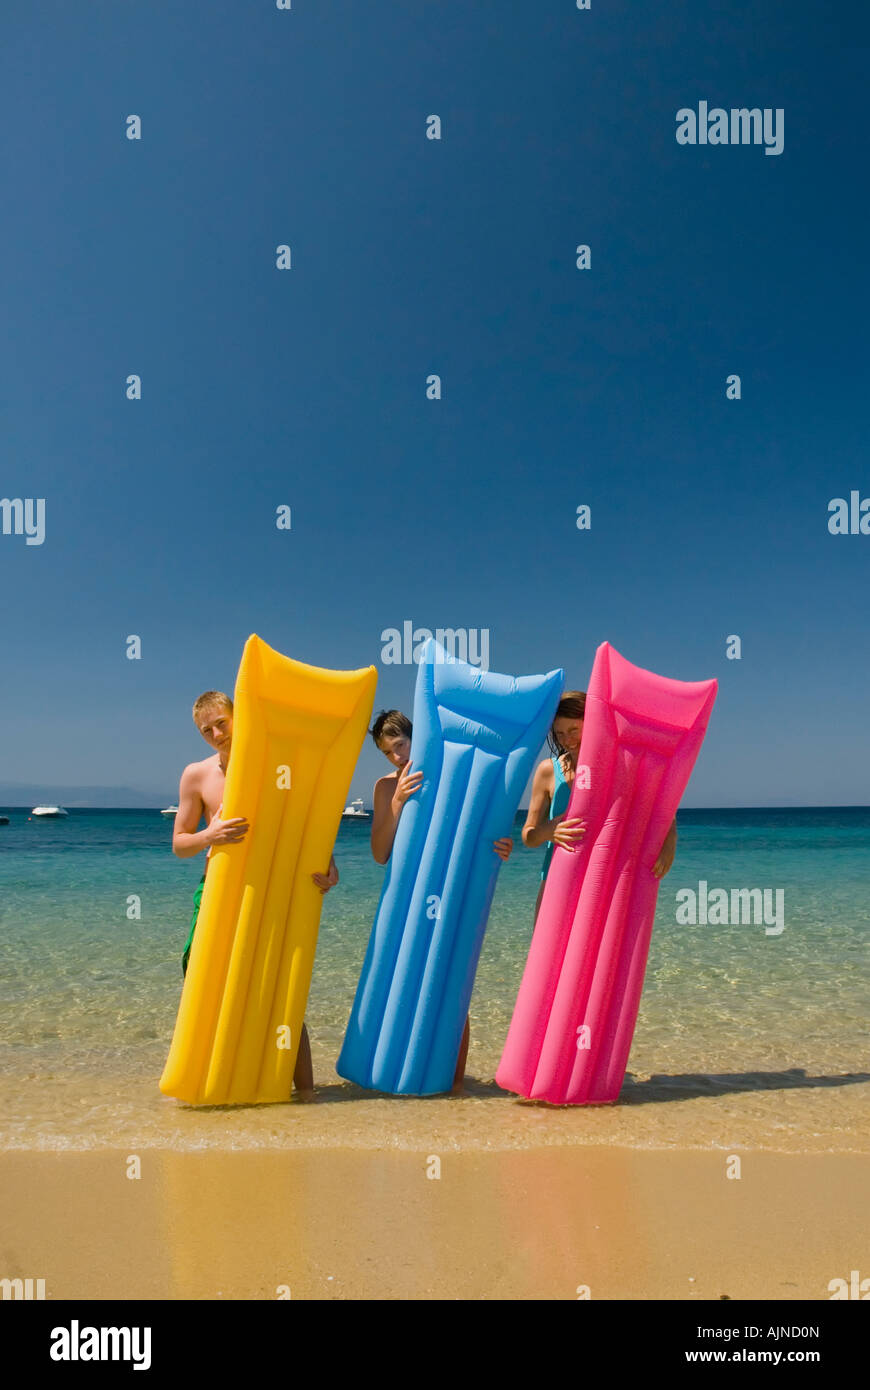 Three people looking out from behind colourful li-los inflatable airbeds sandy beach blue sea and sky Mediterranean Greece Stock Photo